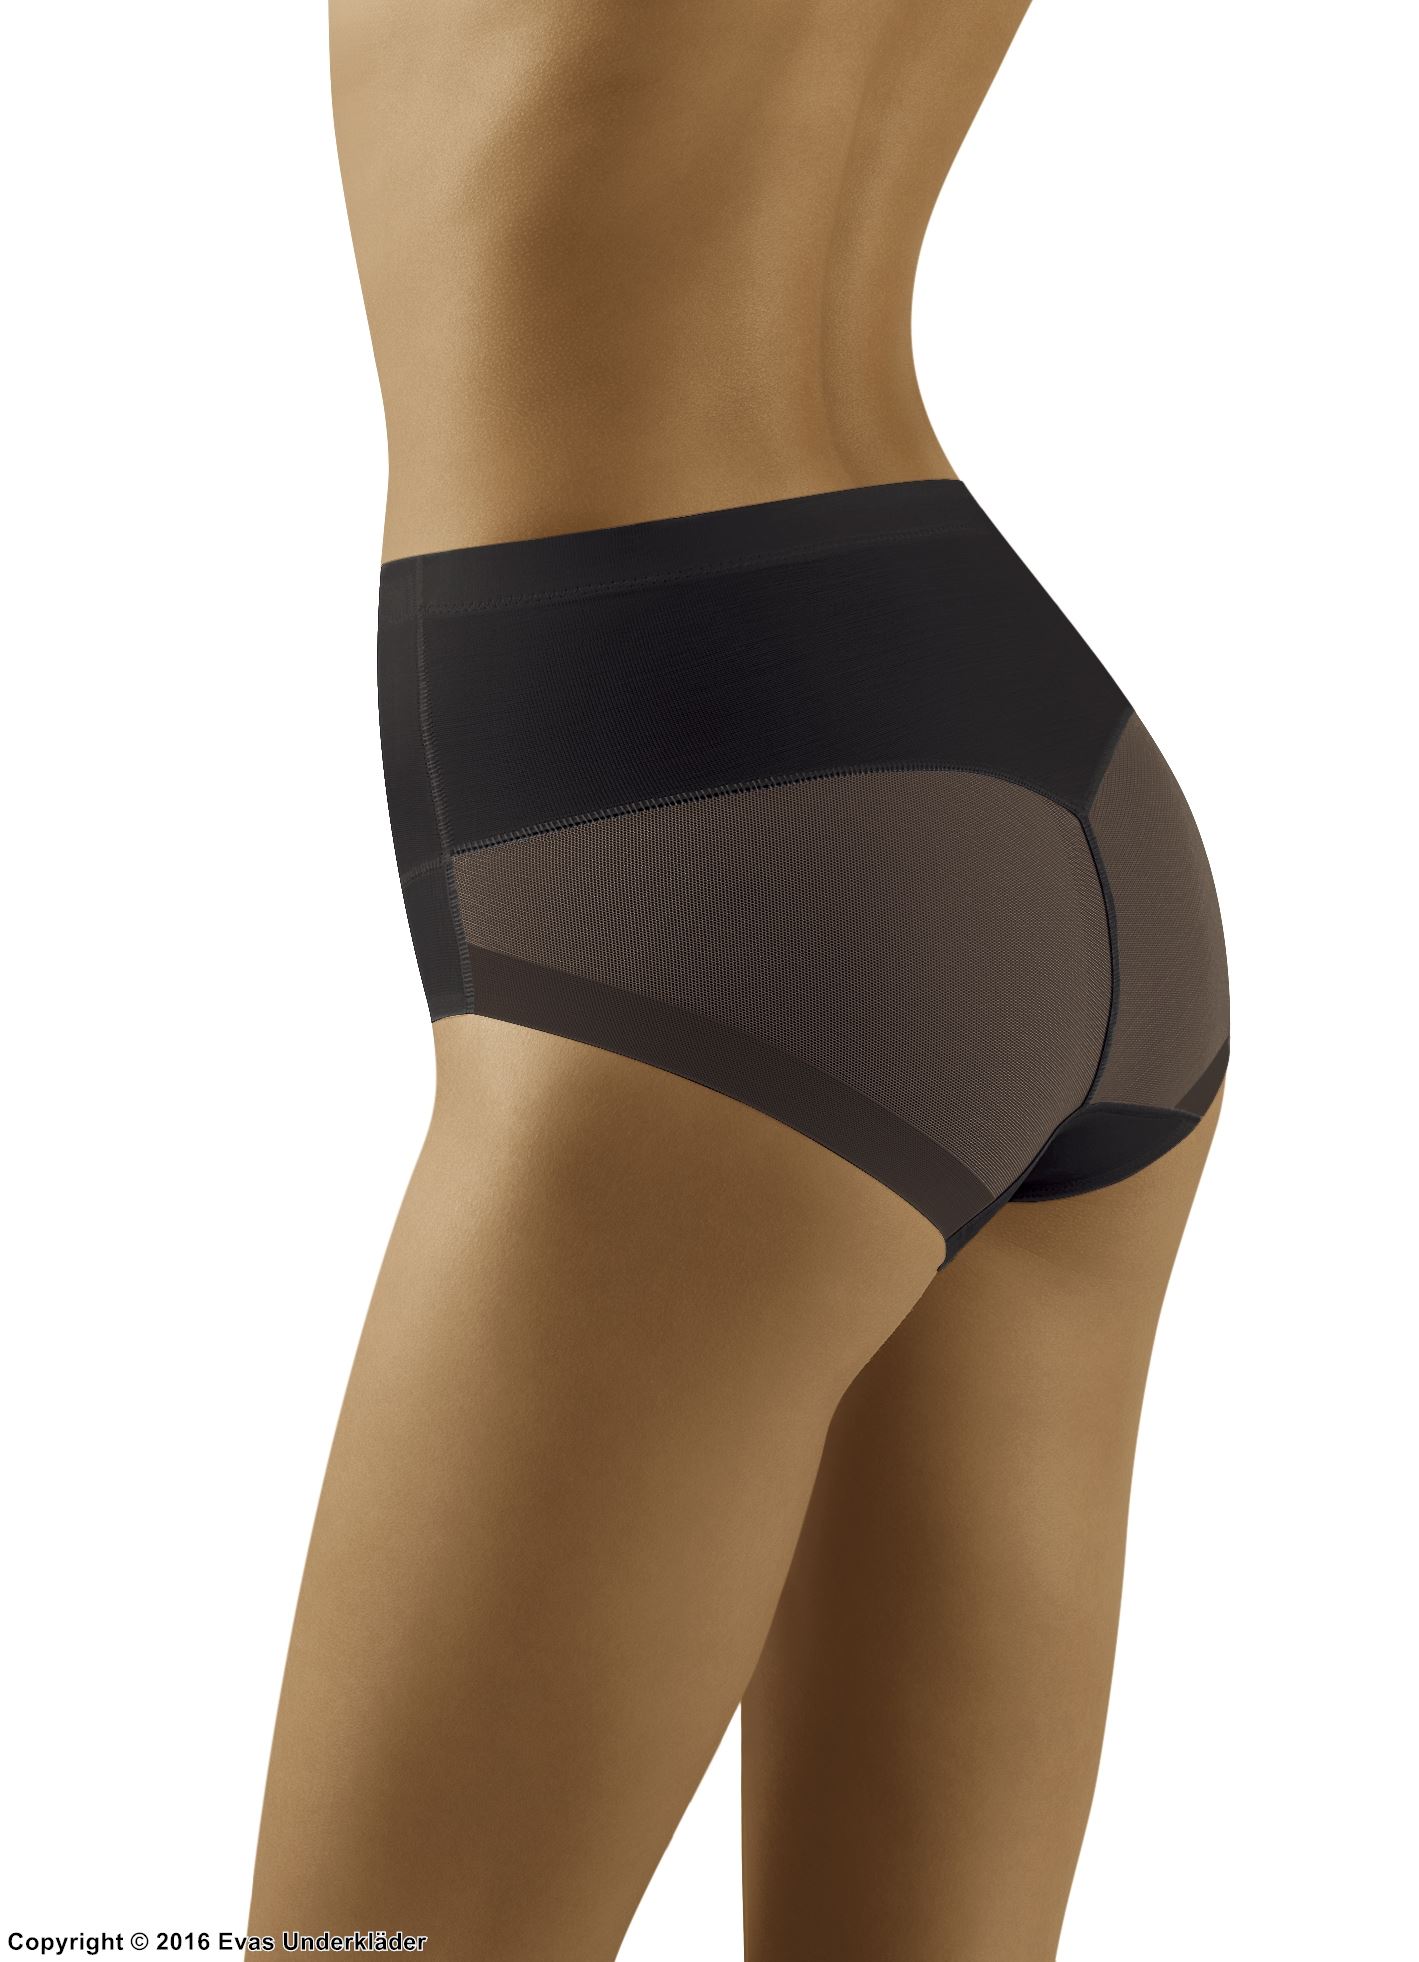 Shaping briefs, mesh inlay, slightly higher waist, belly control